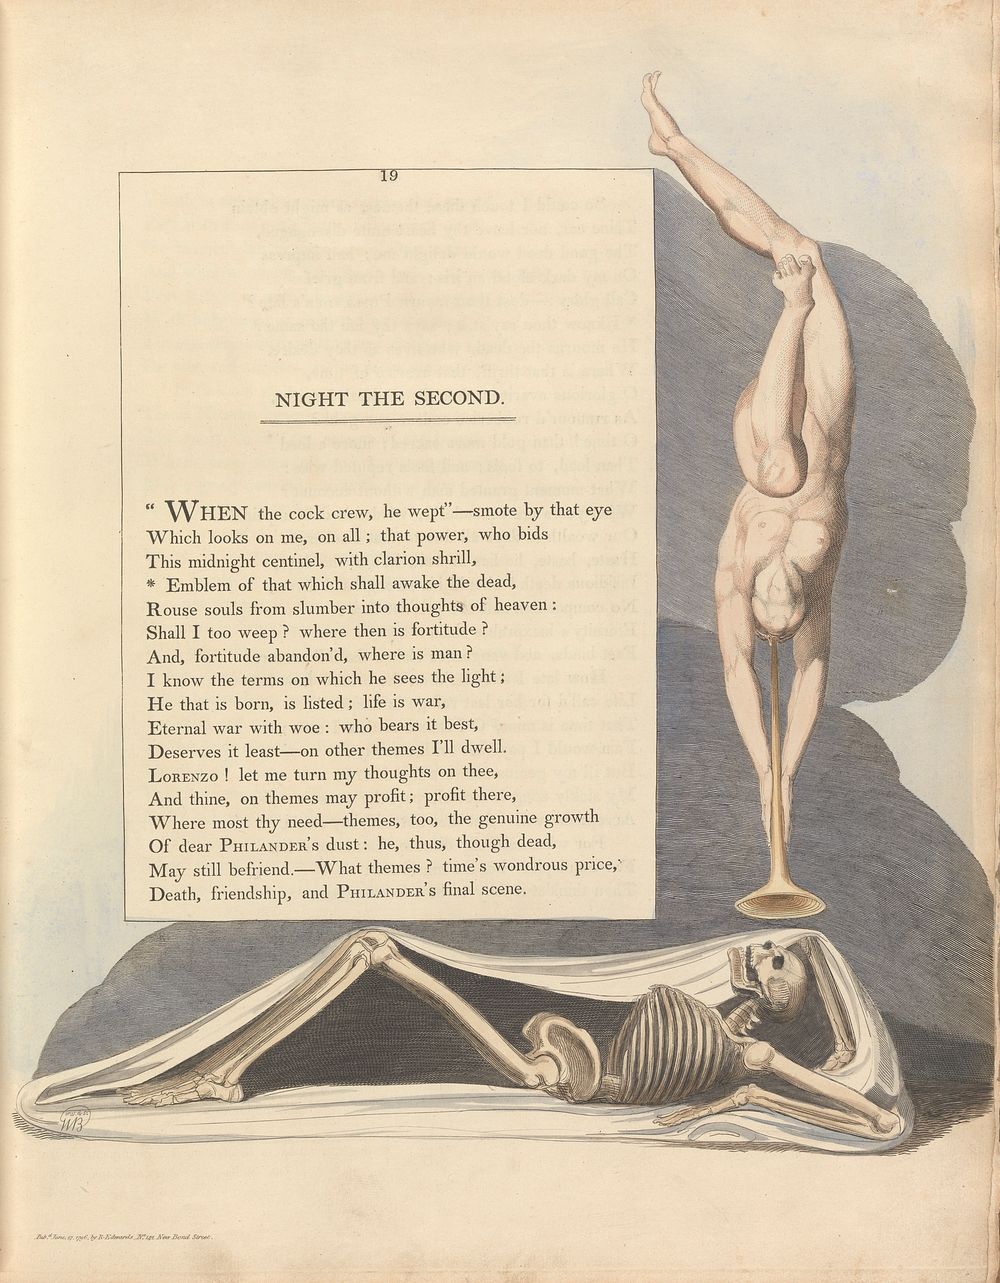 Young's Night Thoughts, Page 19, "Emblem of that which shall awake the dead" by William Blake.